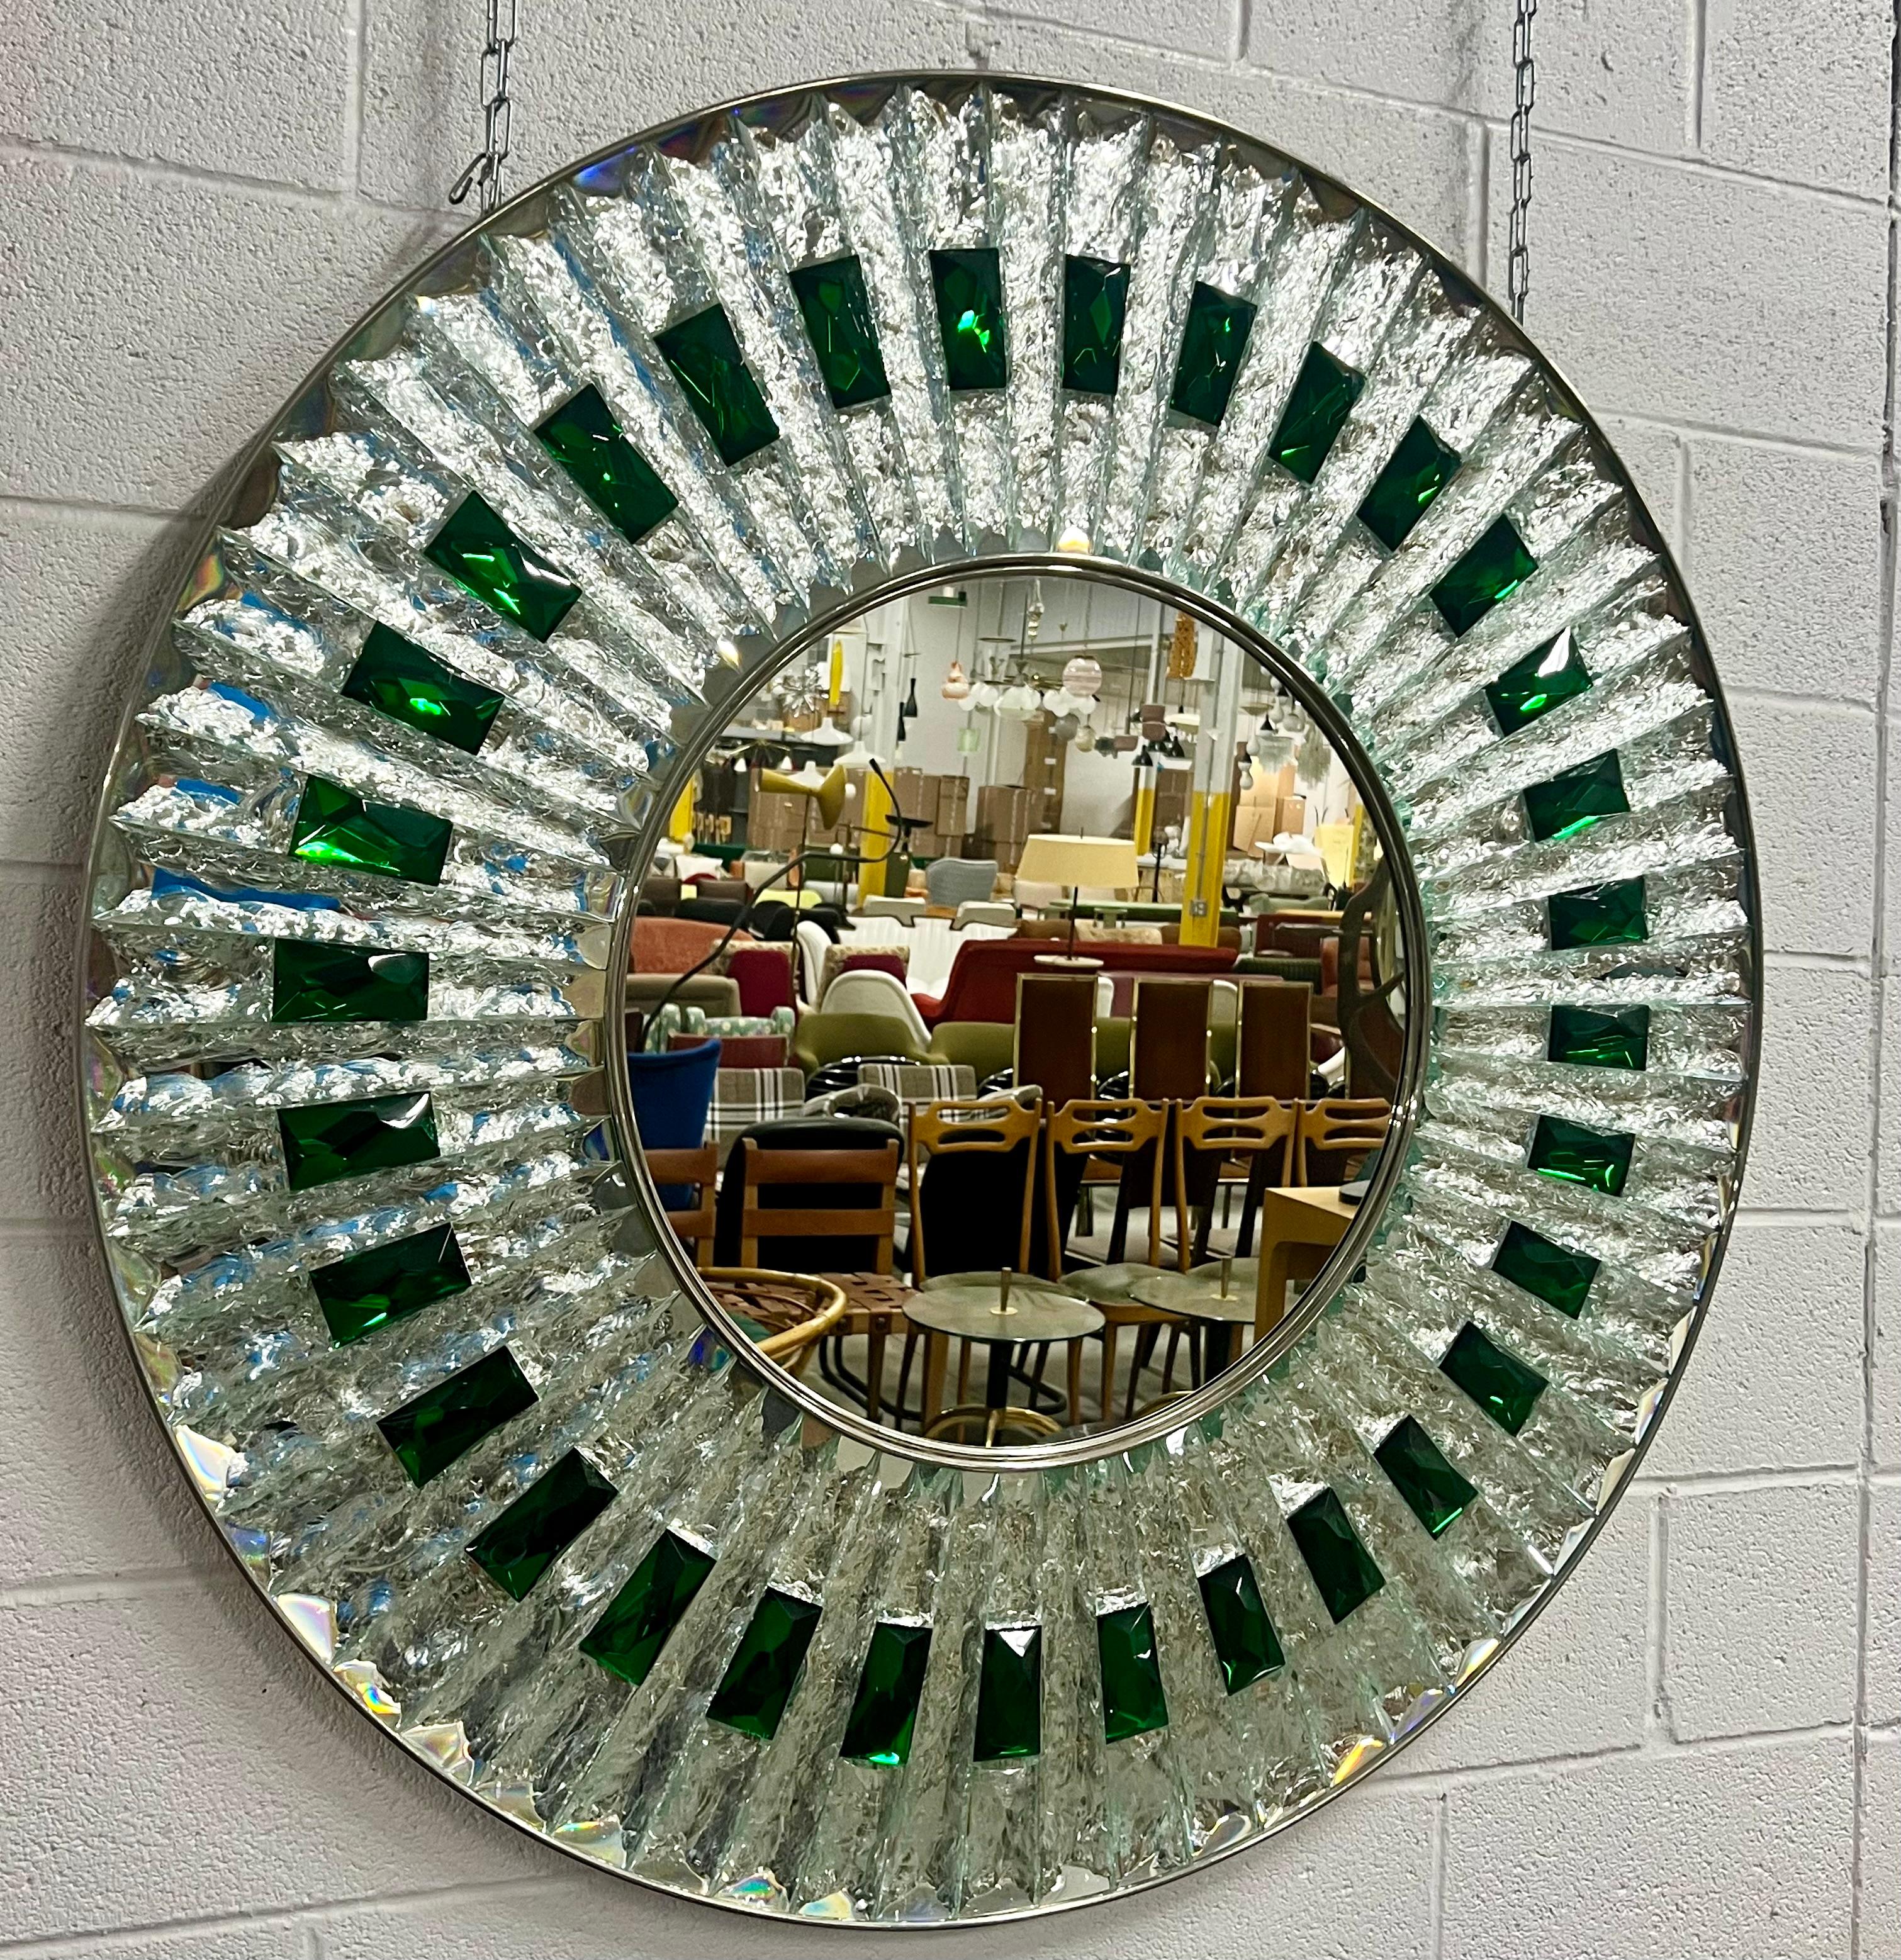 This is a beautiful one of a kind large Ghiro mirror.
Each piece is hand-cut and chiseled emerald green and clear colored crystals surround a central, circular mirror. 